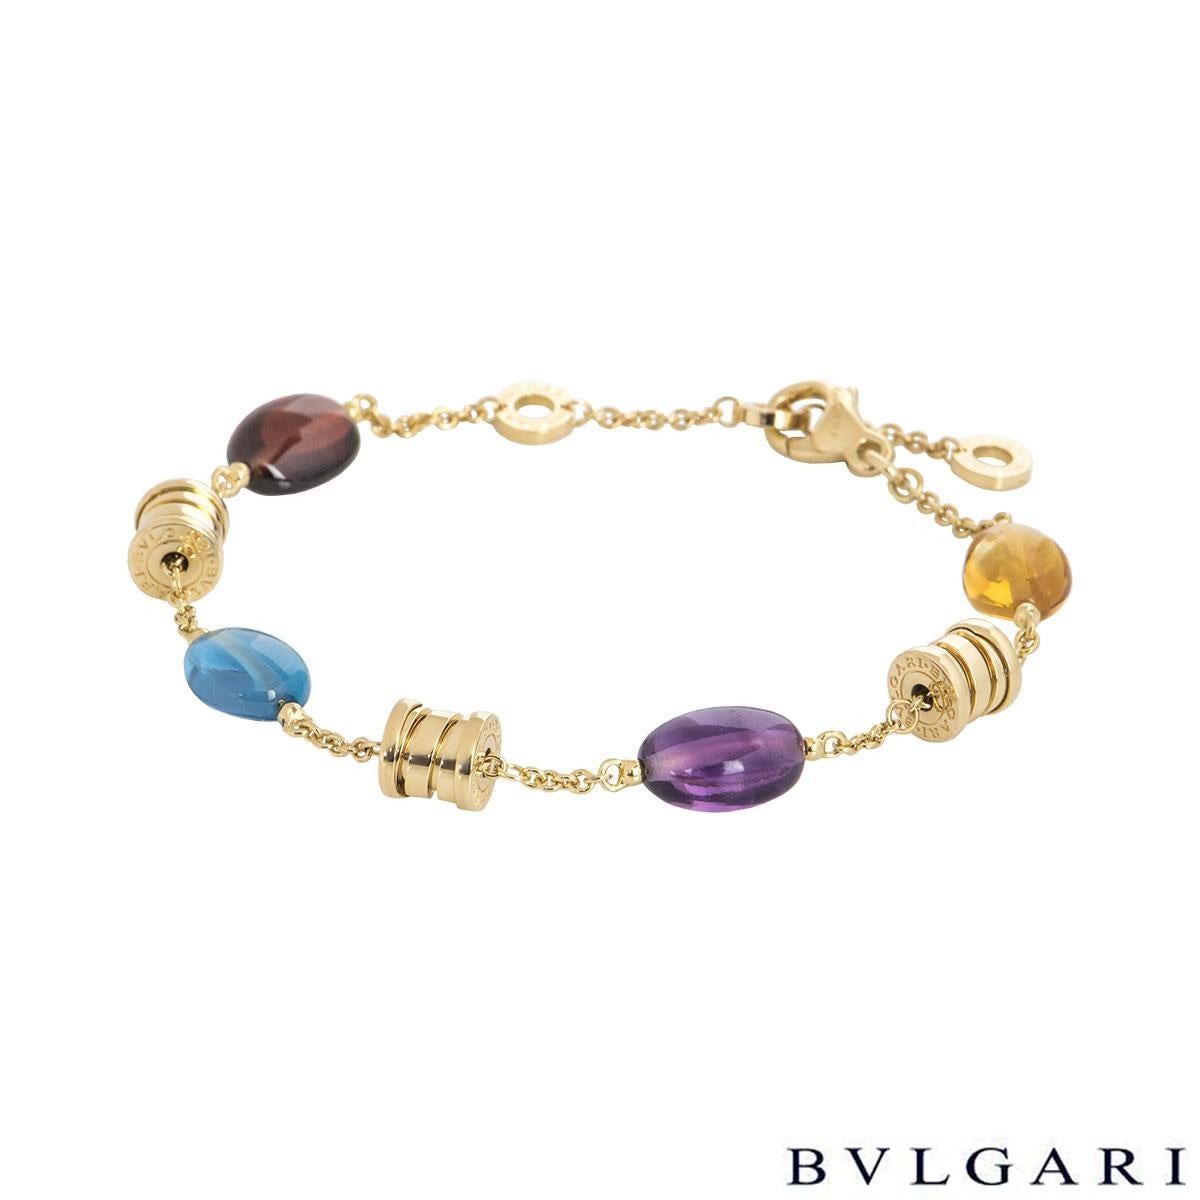 An 18k yellow gold multi-gem bracelet by Bvlgari from the B.zero1 collection. The bracelet comprises of a single amethyst, blue topaz, citrine and garnet alternating with the 'Bvlgari Bvlgari' barrels. The amethyst has a weight of 0.75ct, blue topaz